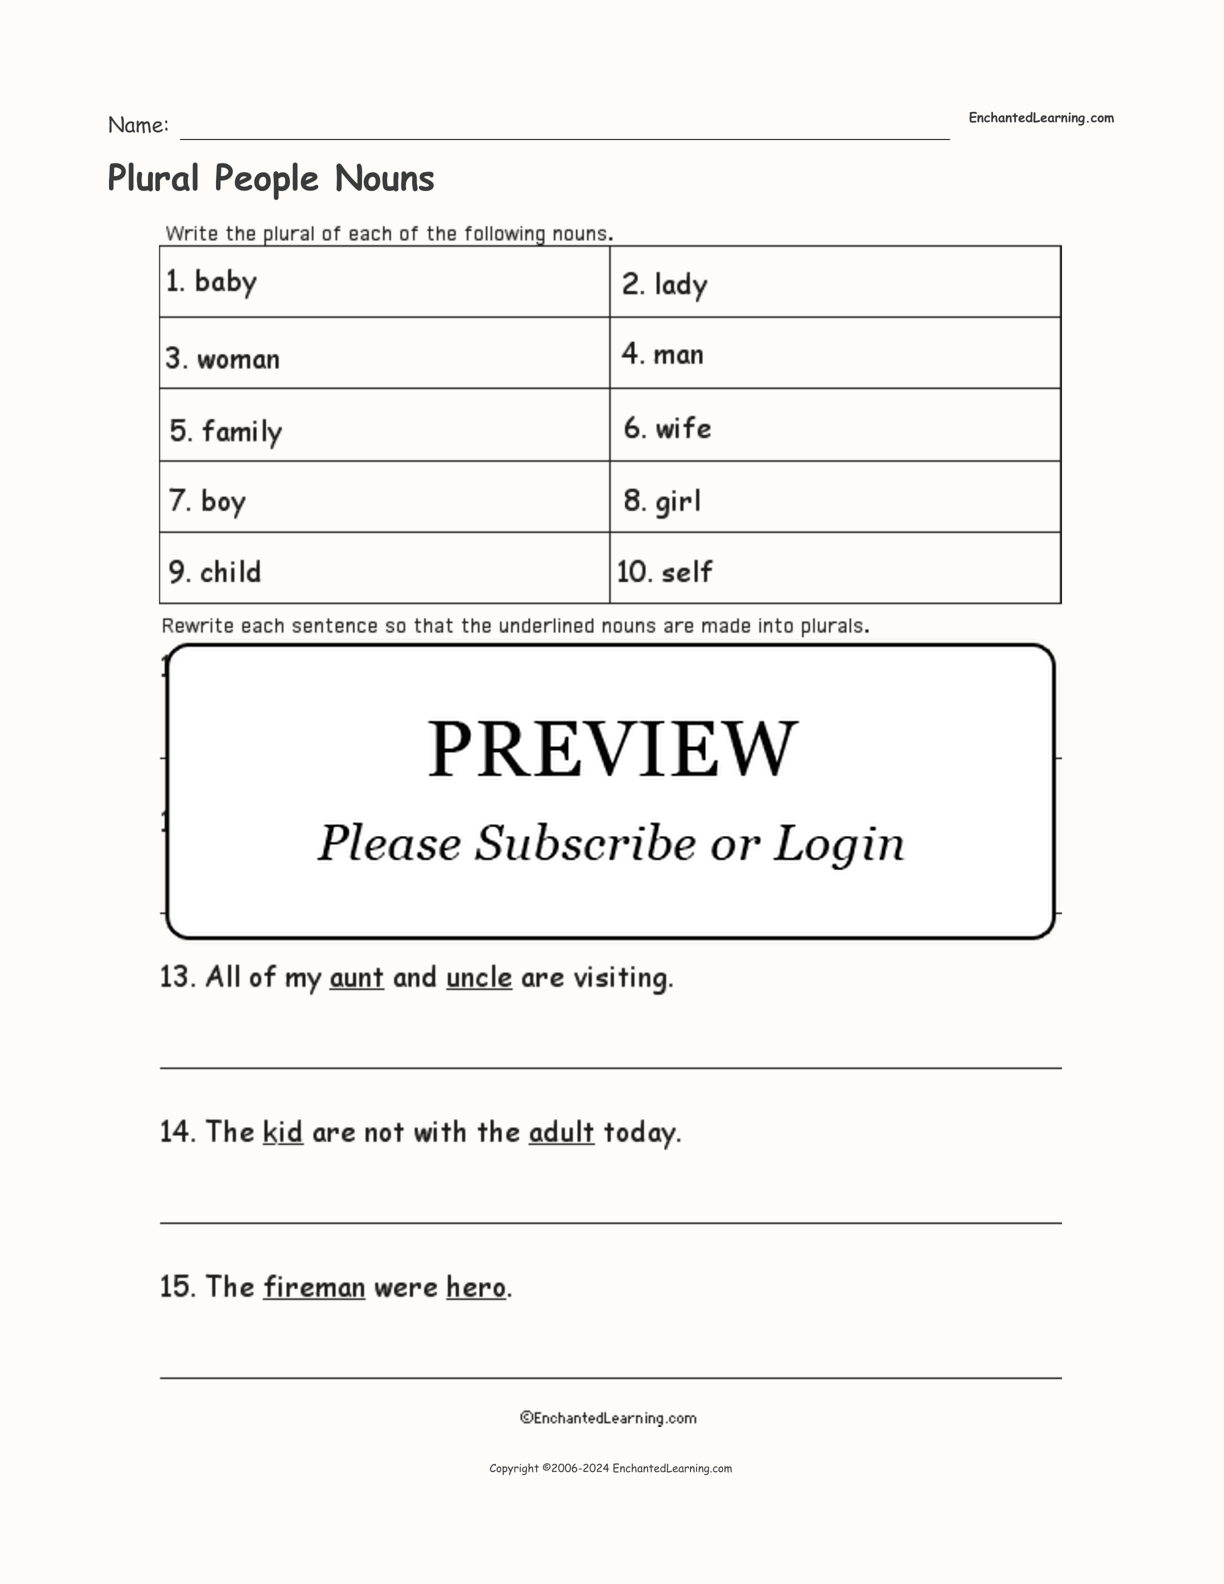 Plural People Nouns interactive worksheet page 1